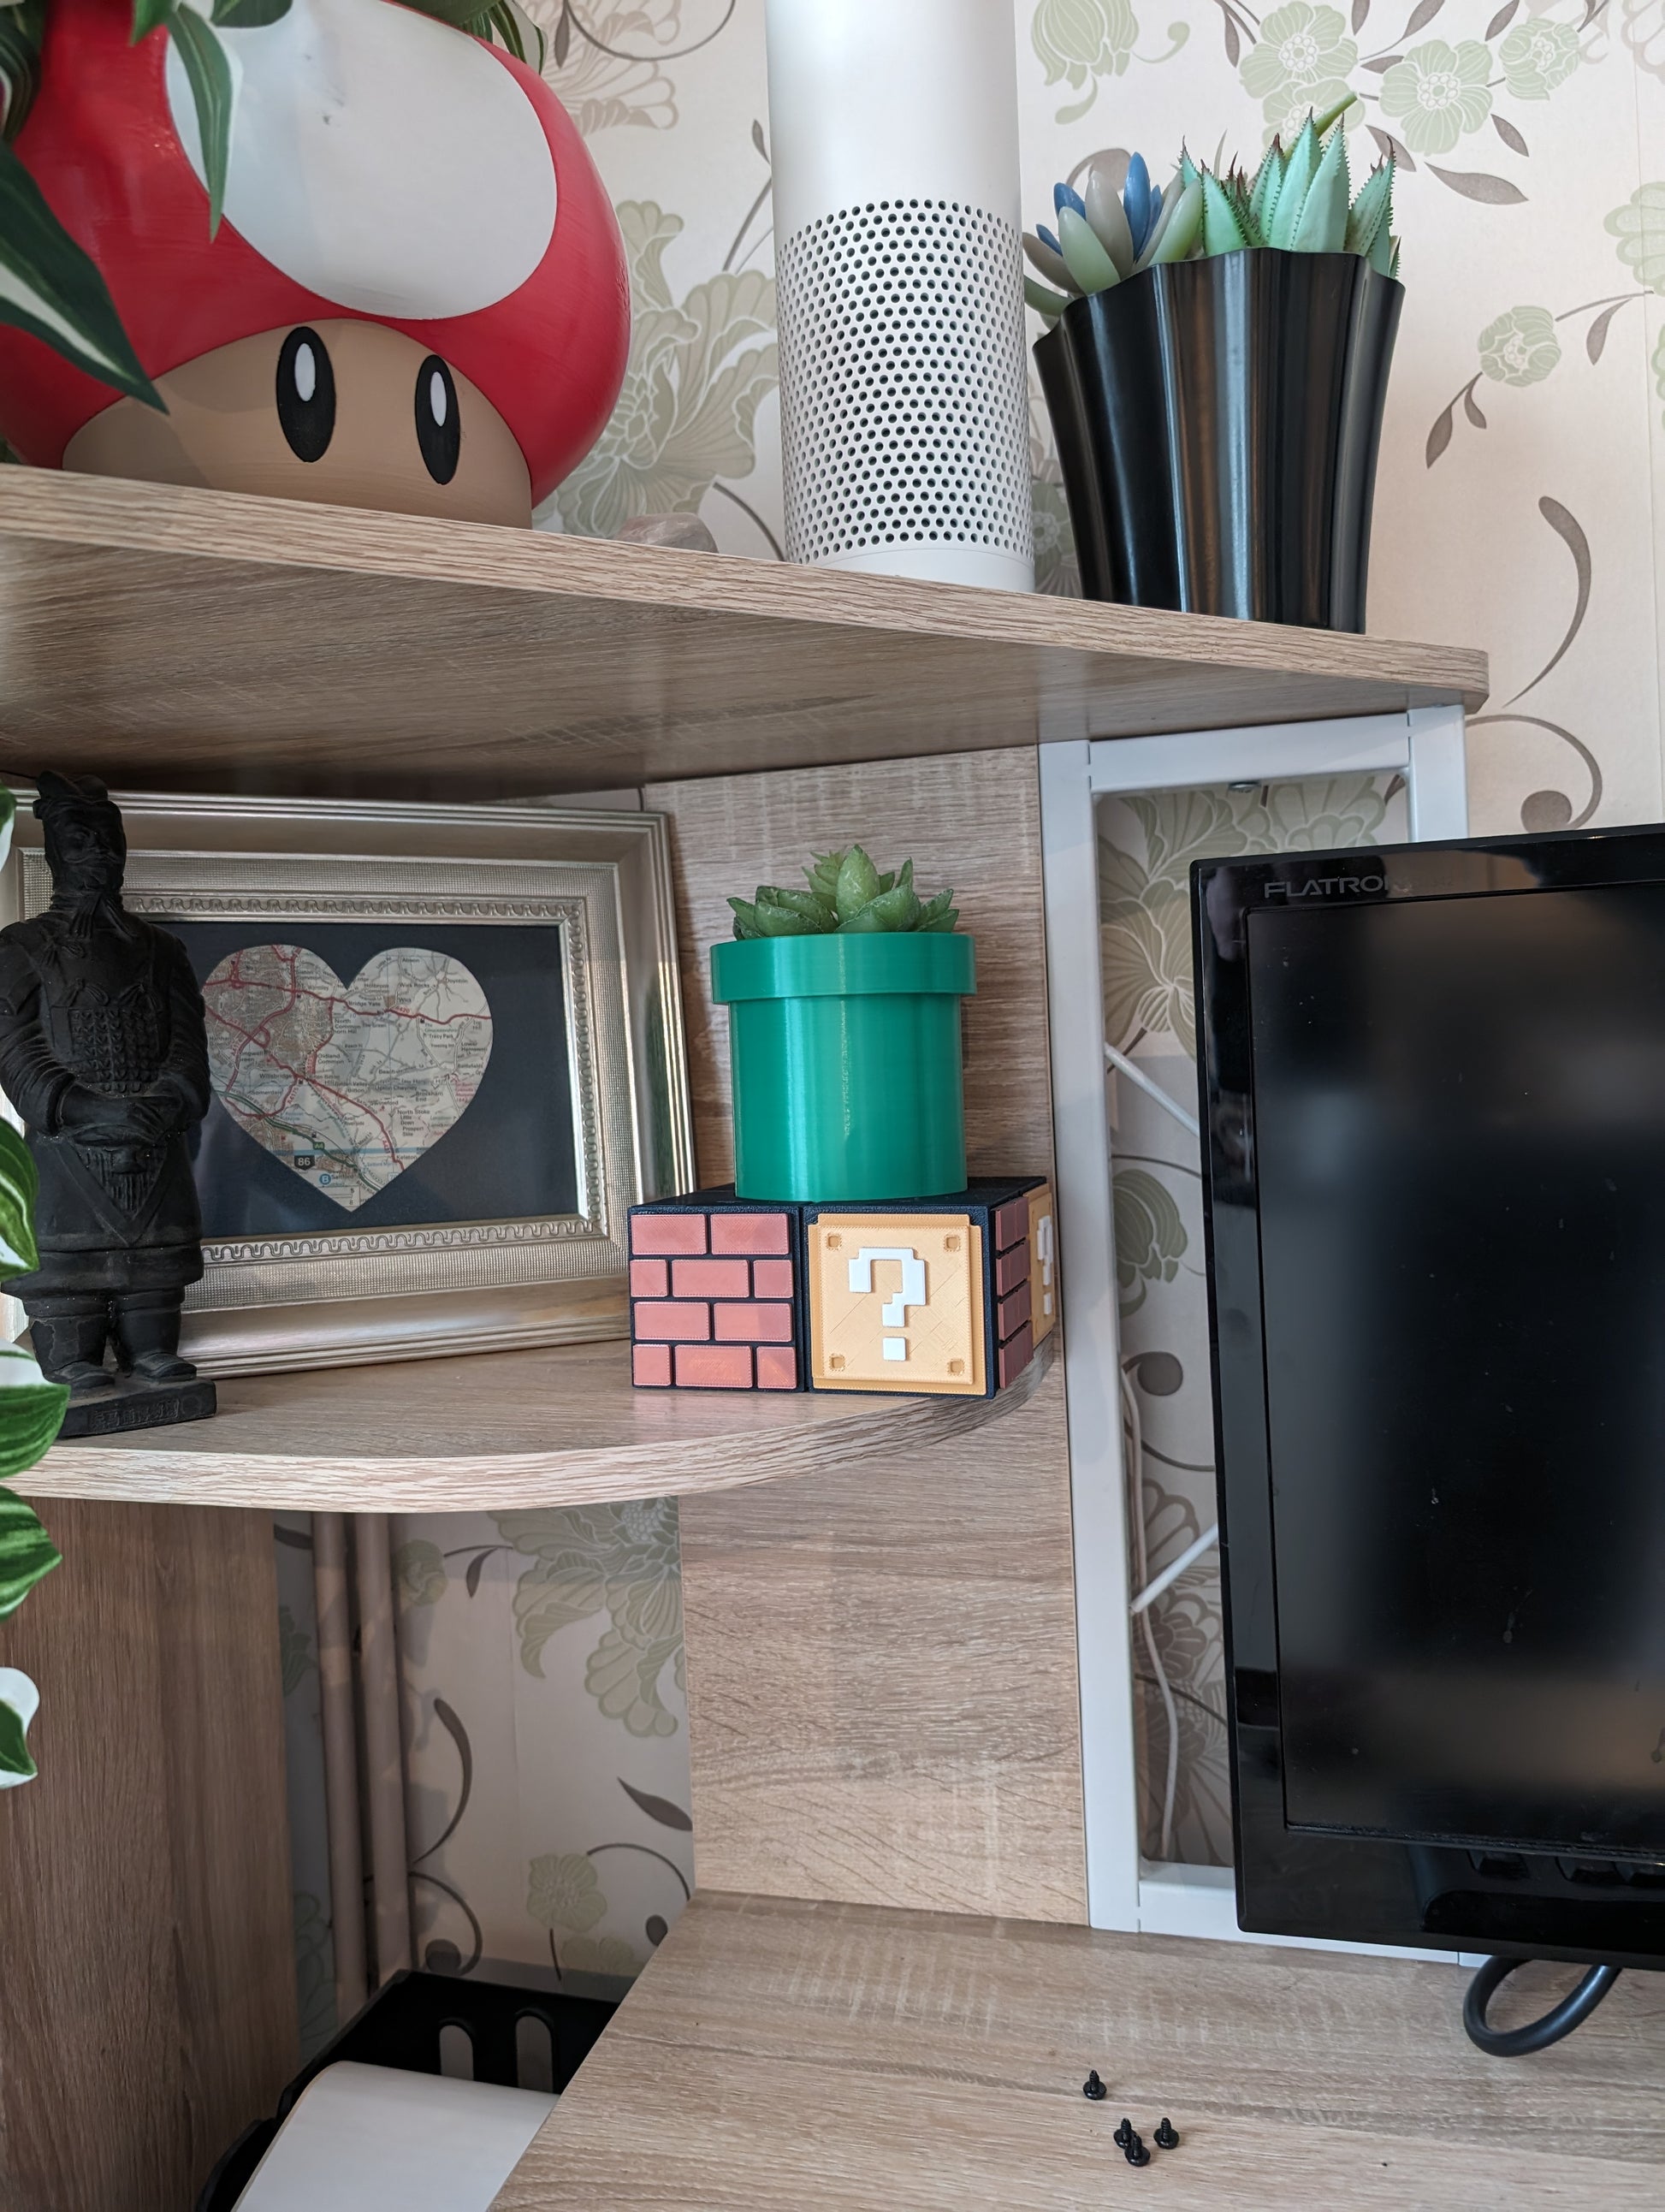 Mario desk organiser from a wide angle